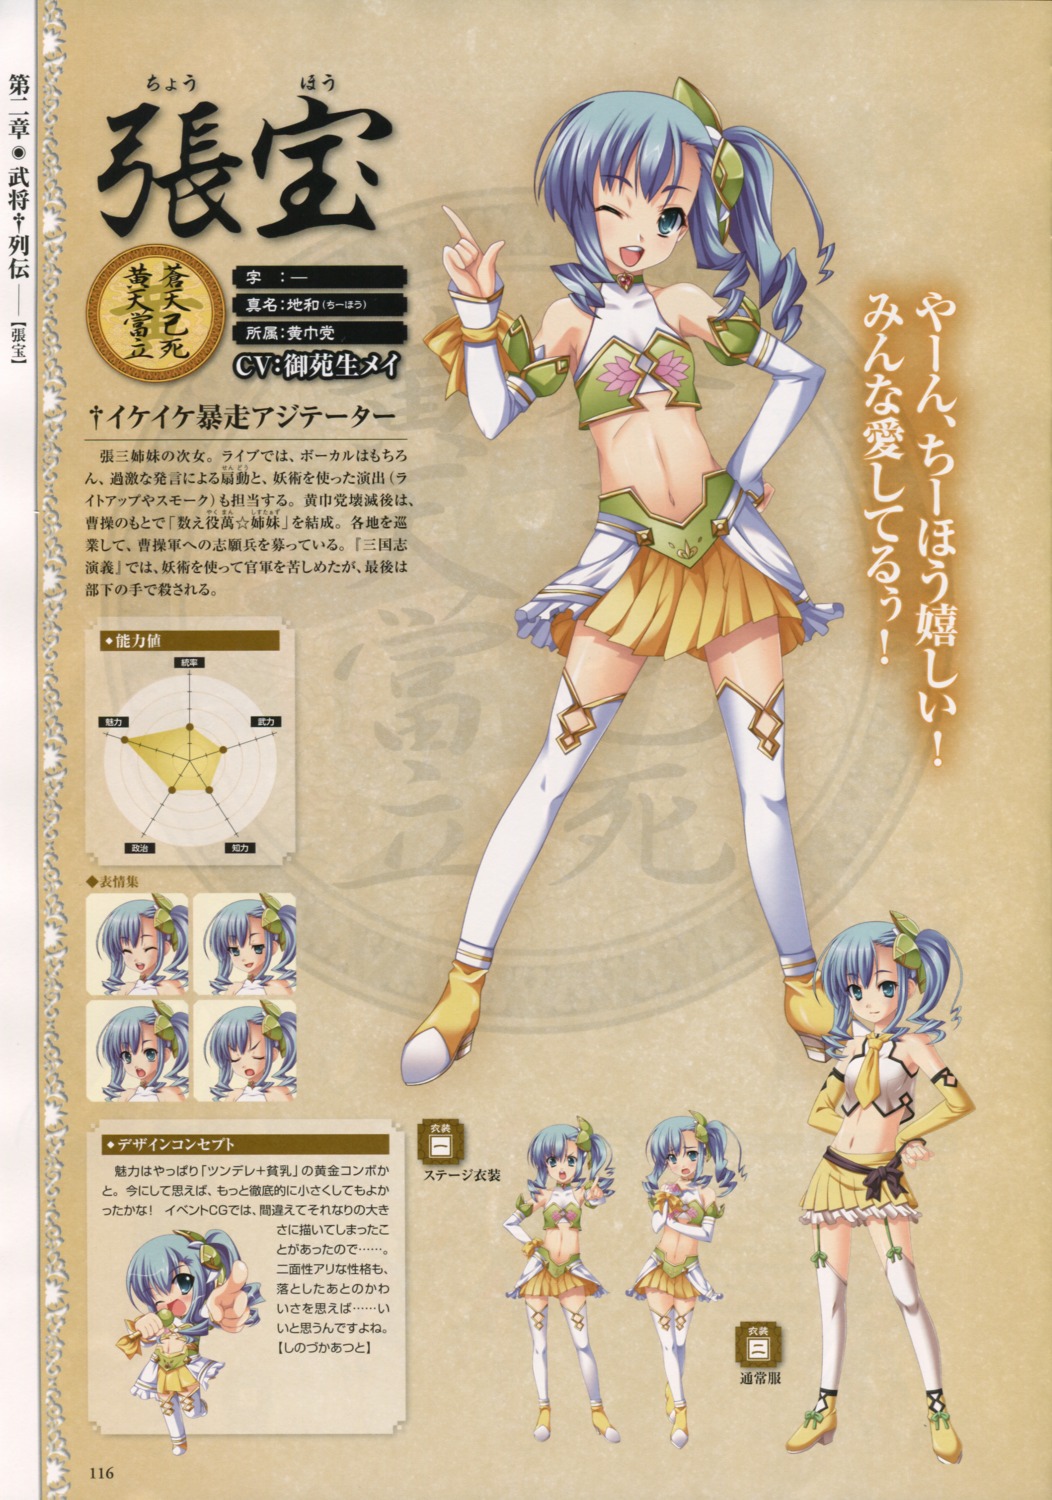 baseson character_design chibi chouhou expression koihime_musou profile_page stockings thighhighs